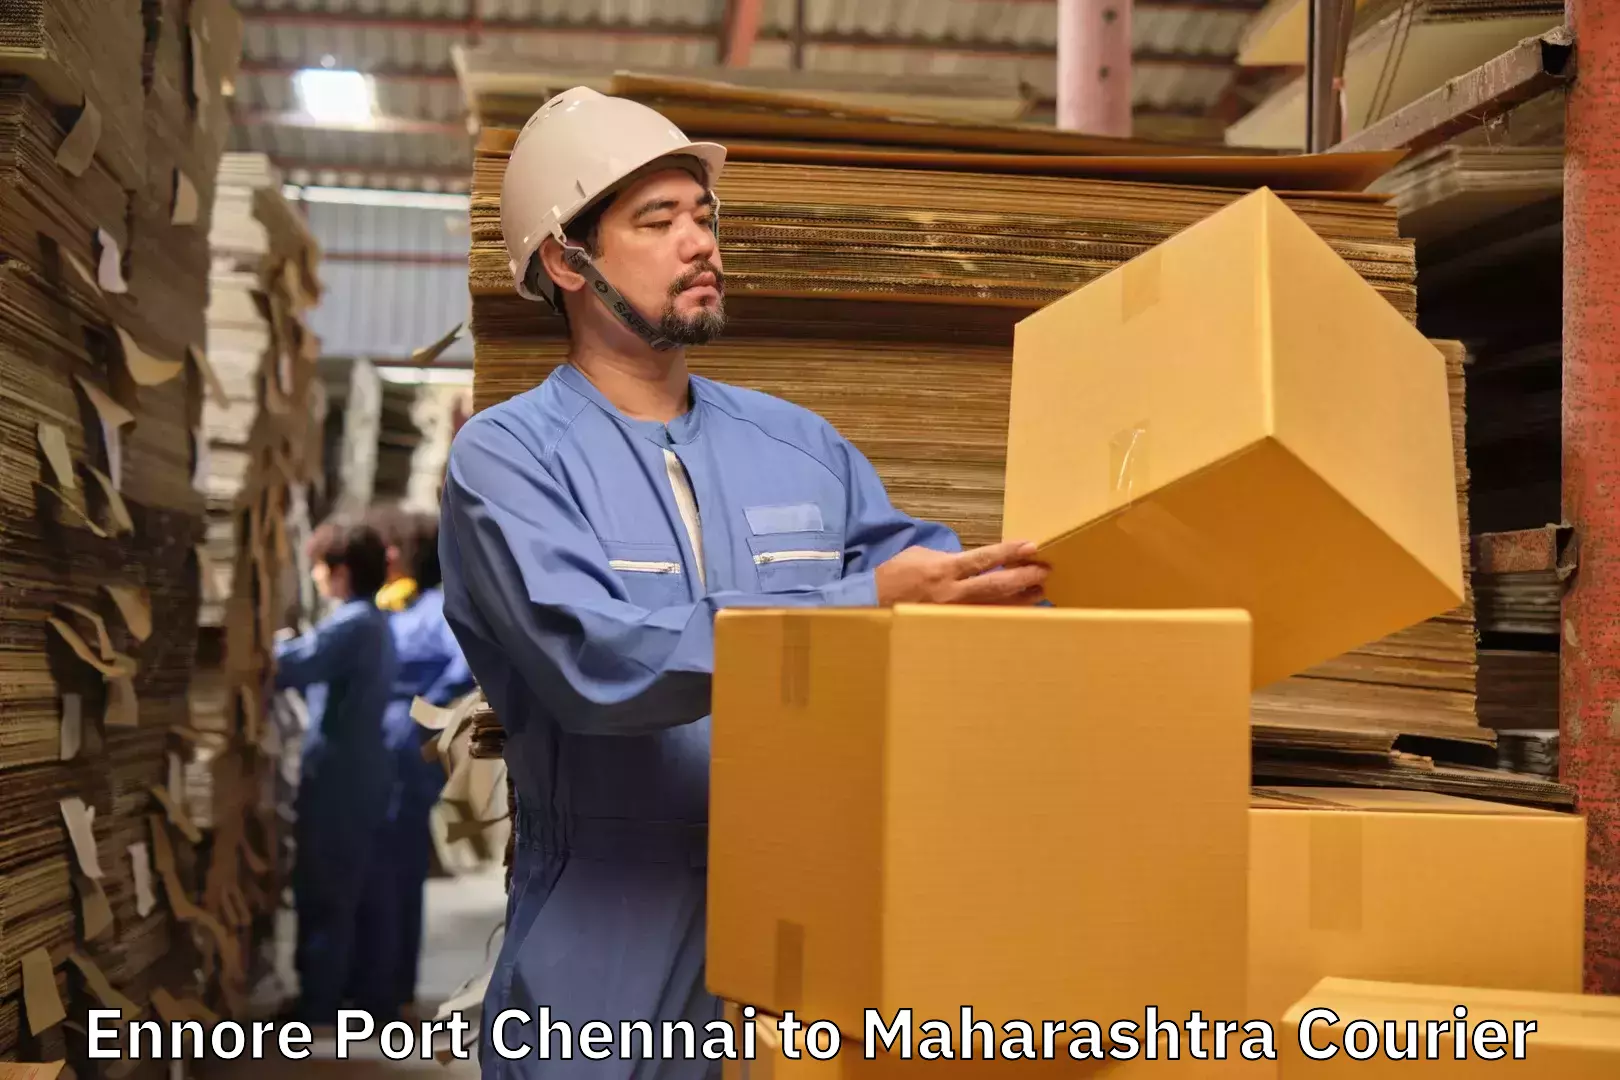 Baggage transport cost Ennore Port Chennai to Chandrapur